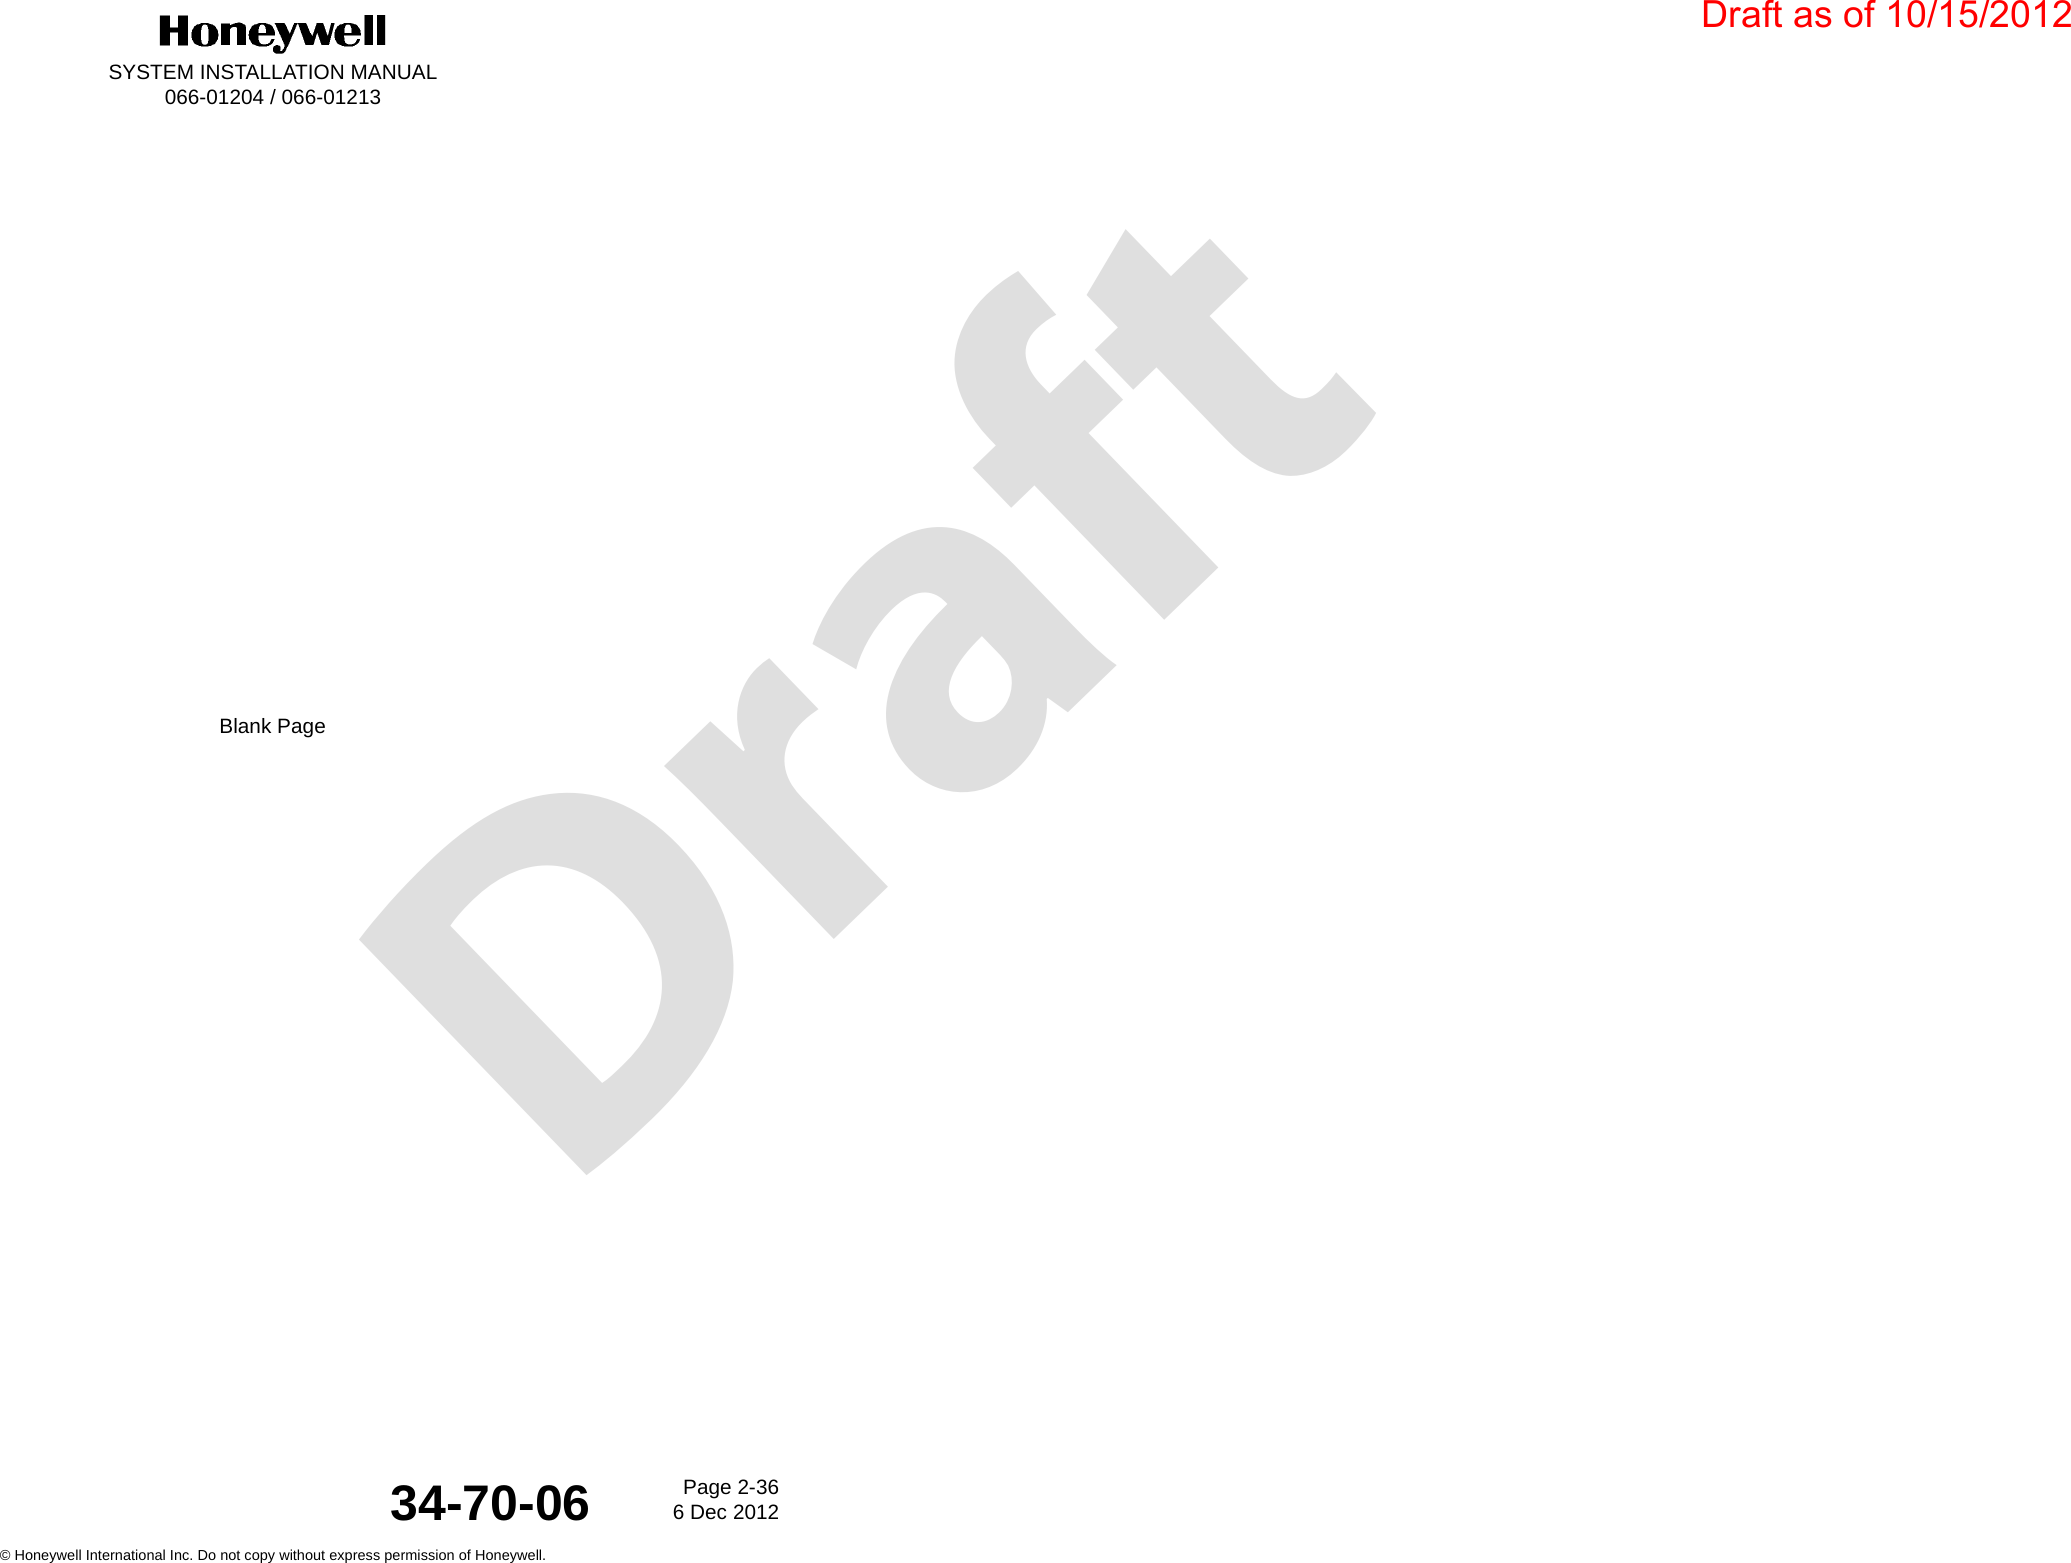 DraftSYSTEM INSTALLATION MANUAL066-01204 / 066-01213Page 2-366 Dec 2012© Honeywell International Inc. Do not copy without express permission of Honeywell.34-70-06Blank PageDraft as of 10/15/2012